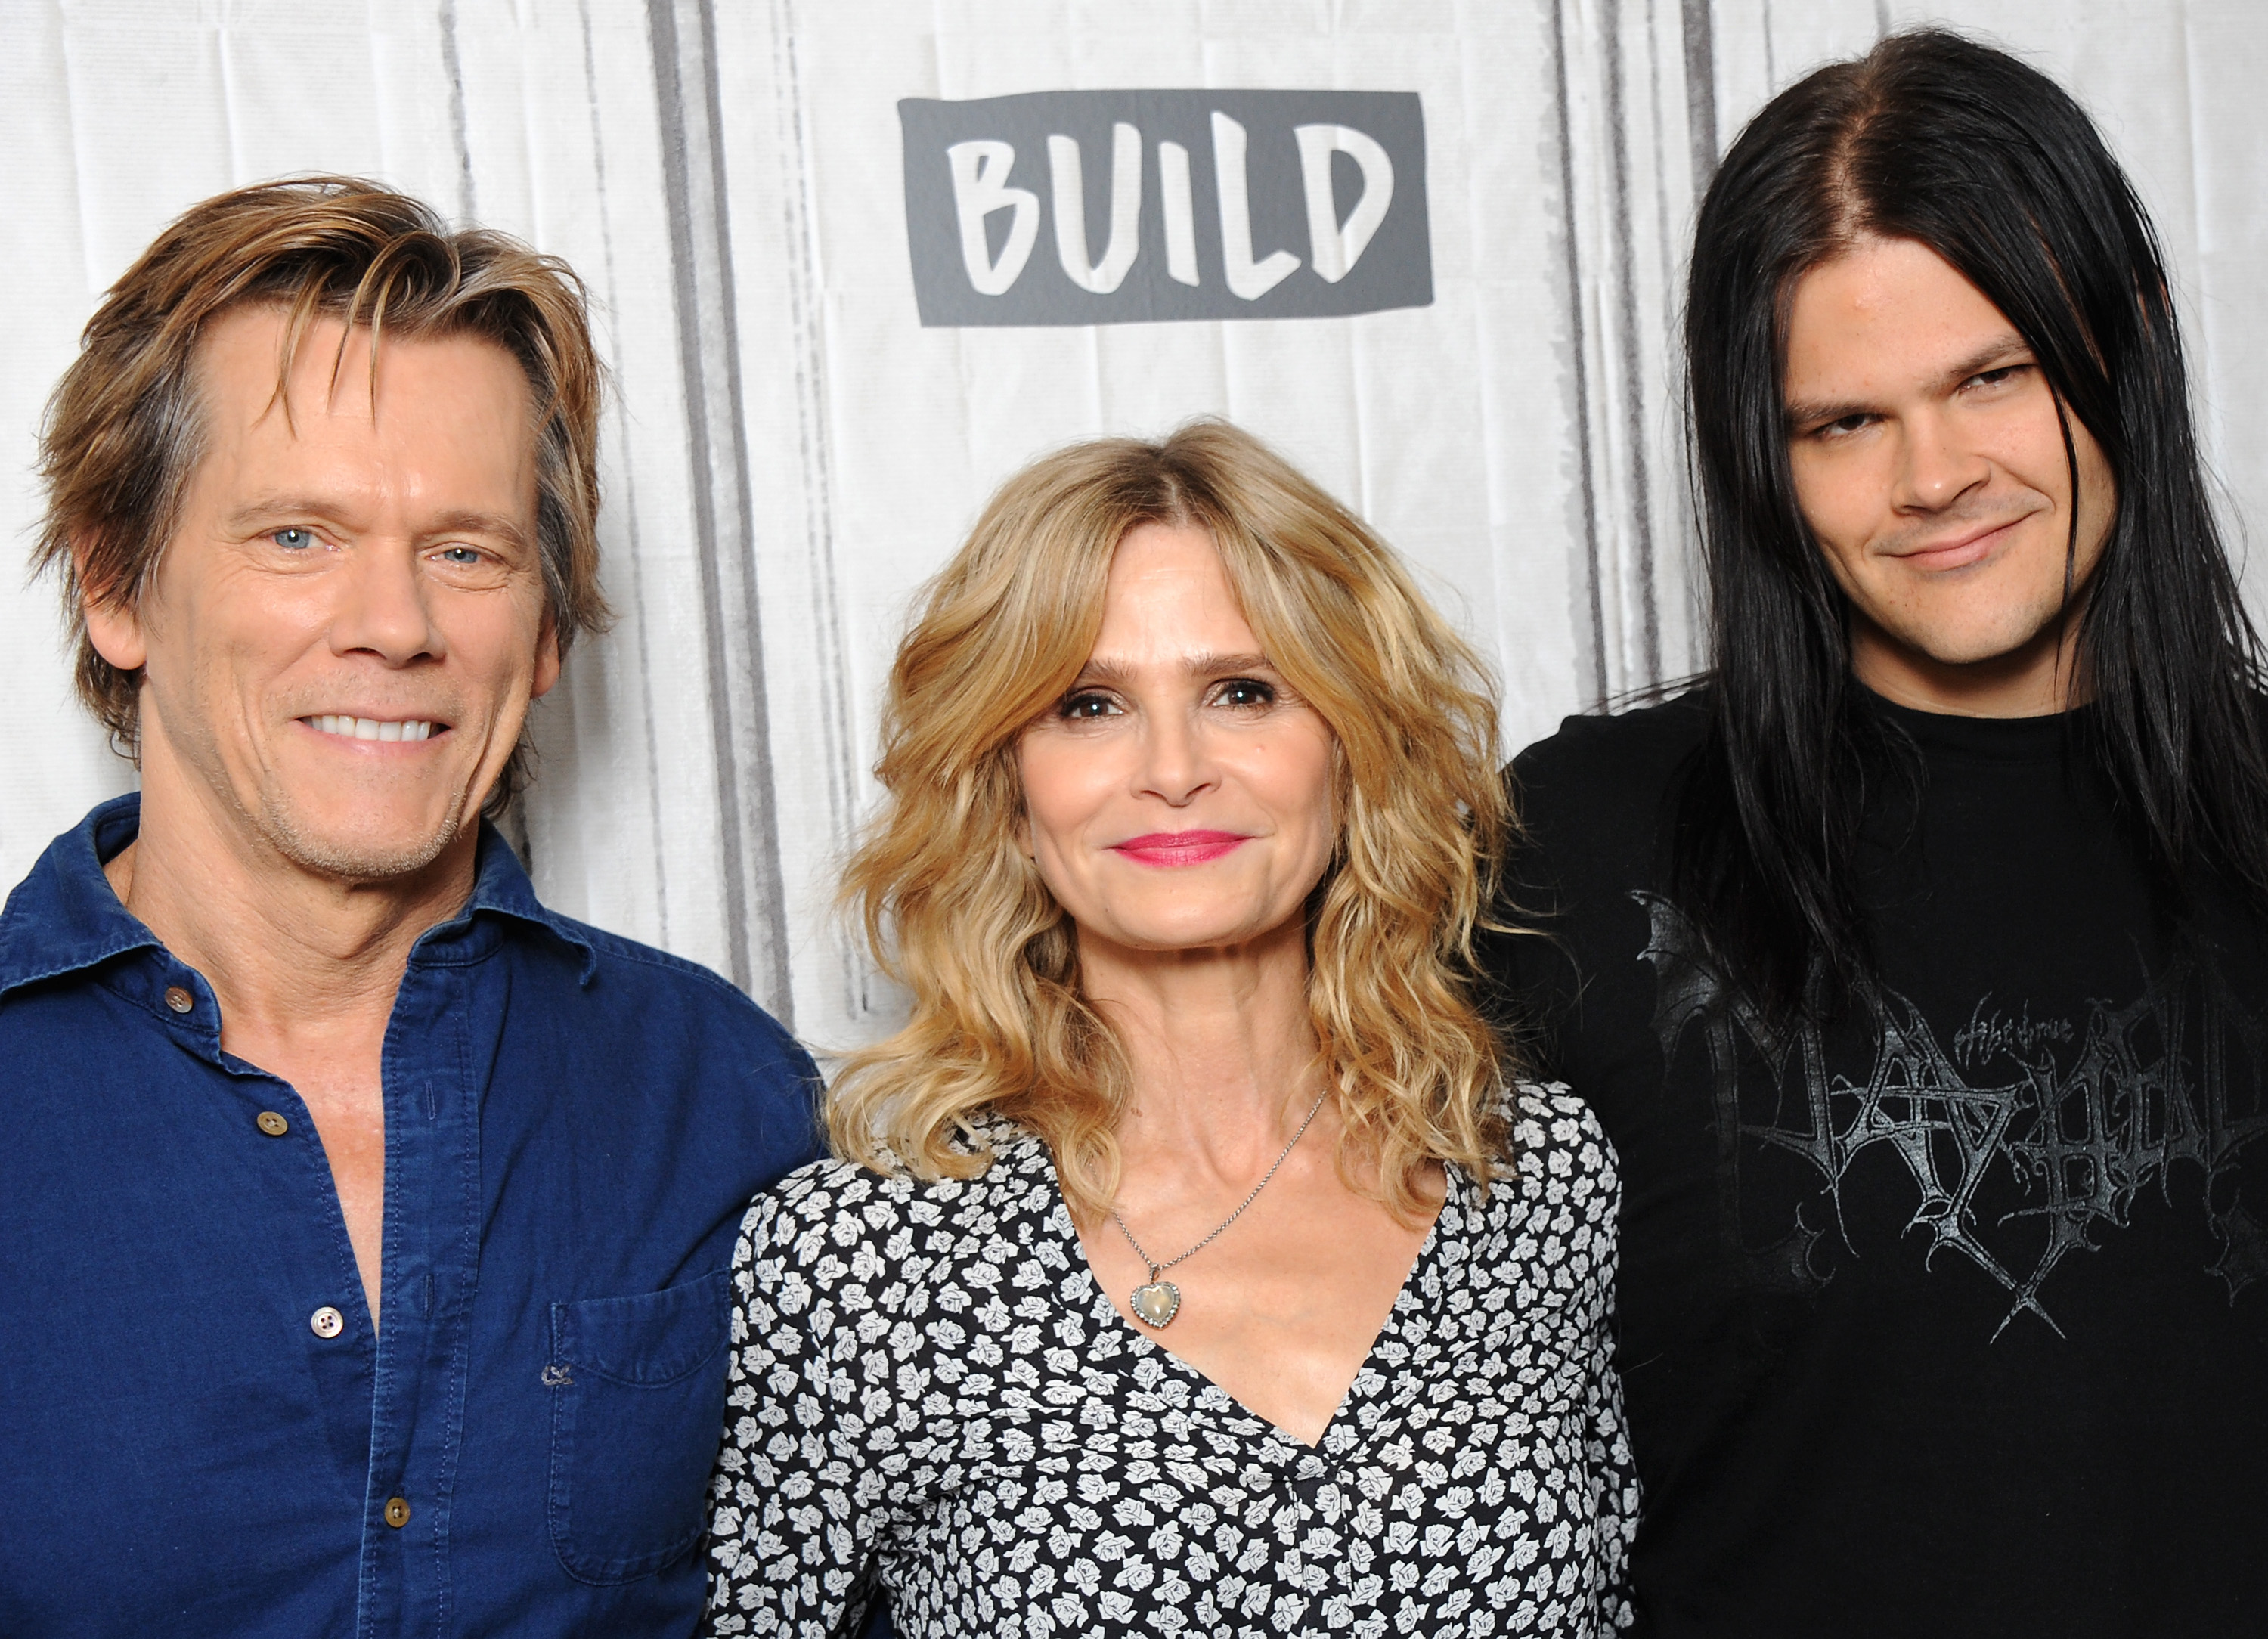 Kevin Bacon, Kyra Sedgwick and their son Travis attend Build previewing the new Lifetime film "Story of a Girl" in New York City on July 21, 2017. | Source: Getty Images